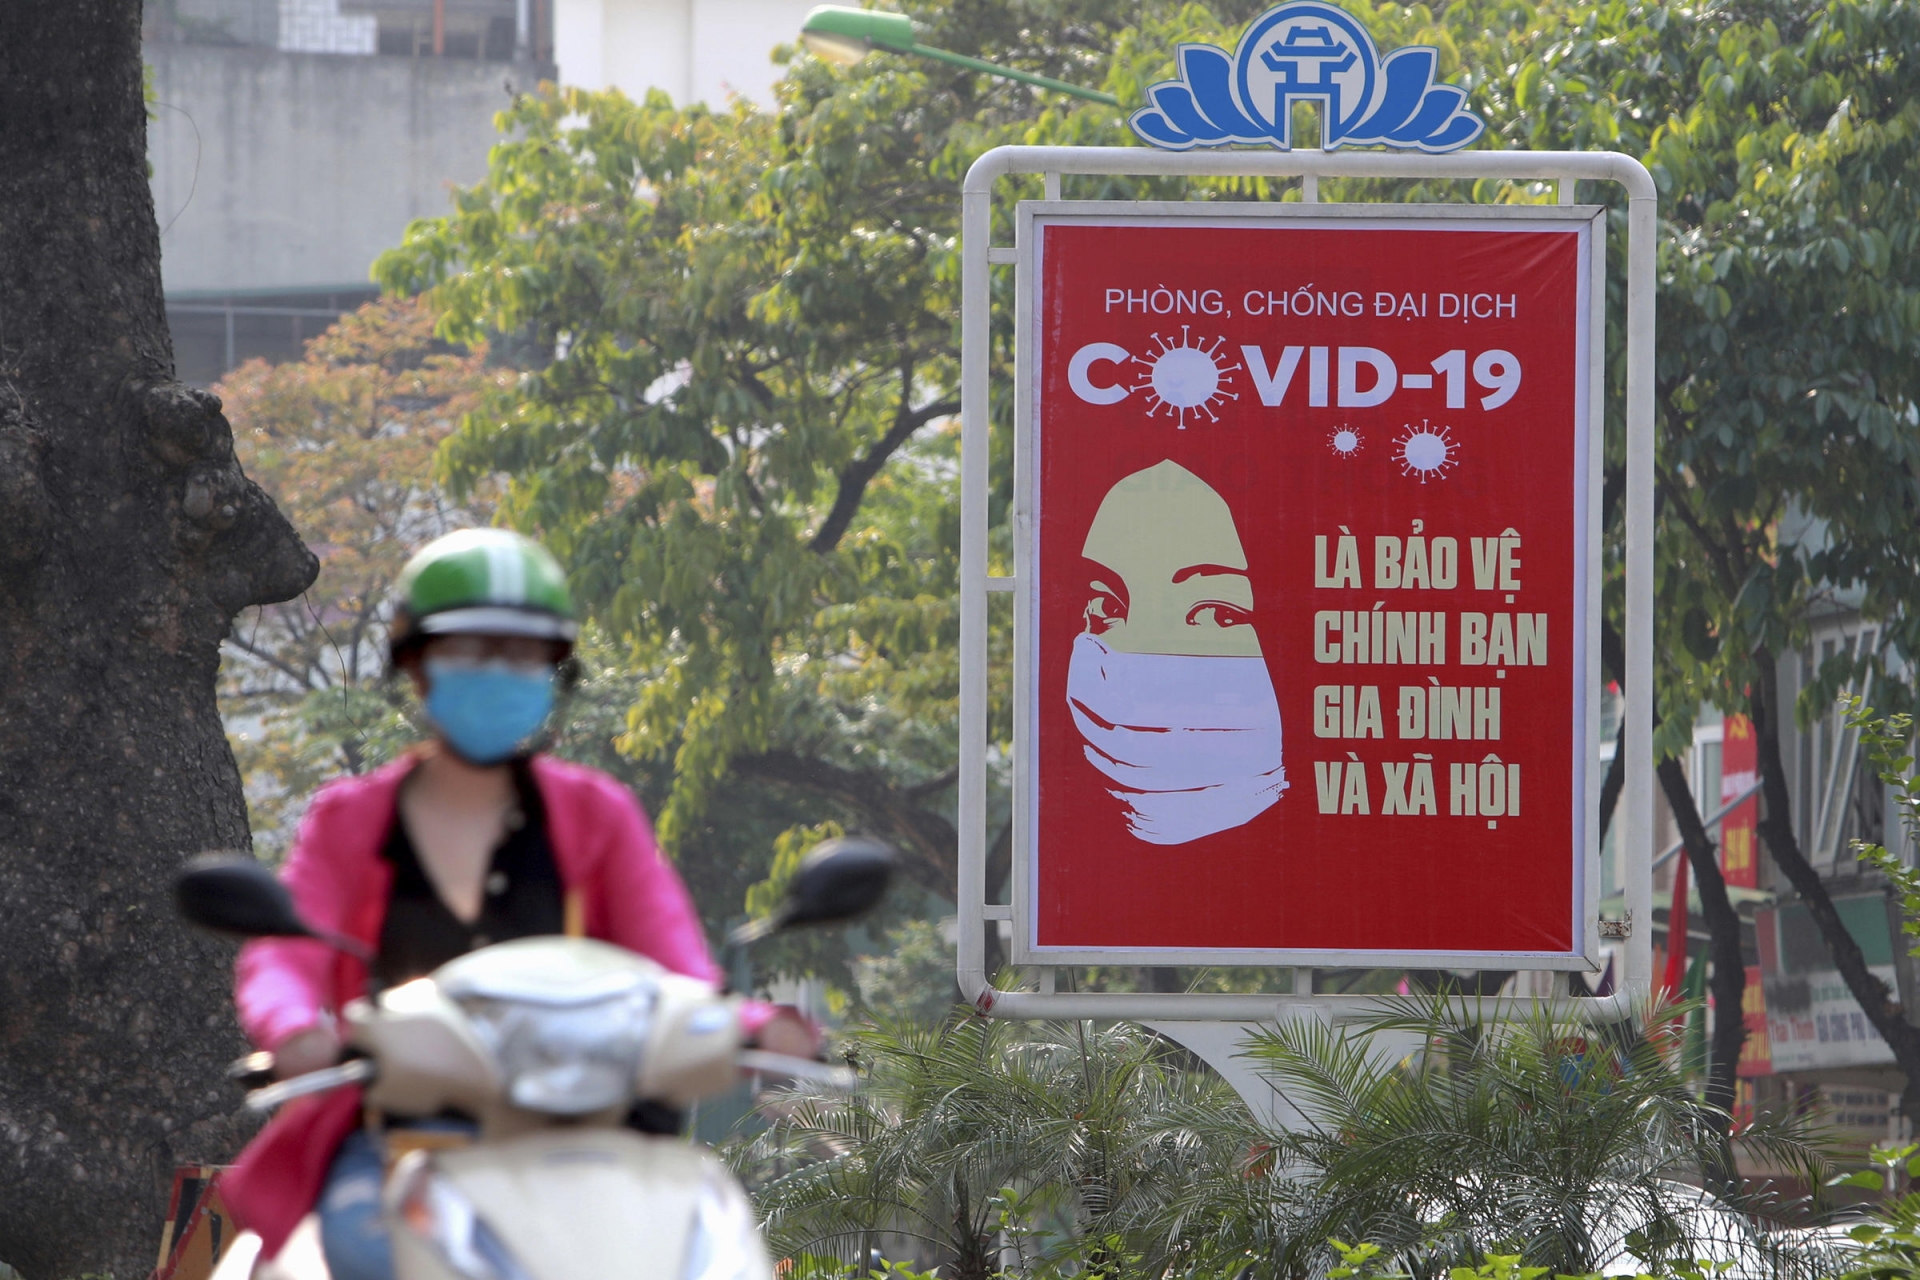 Vietnam’s COVID-19 success through the eyes of an American living in Ho Chi Minh City